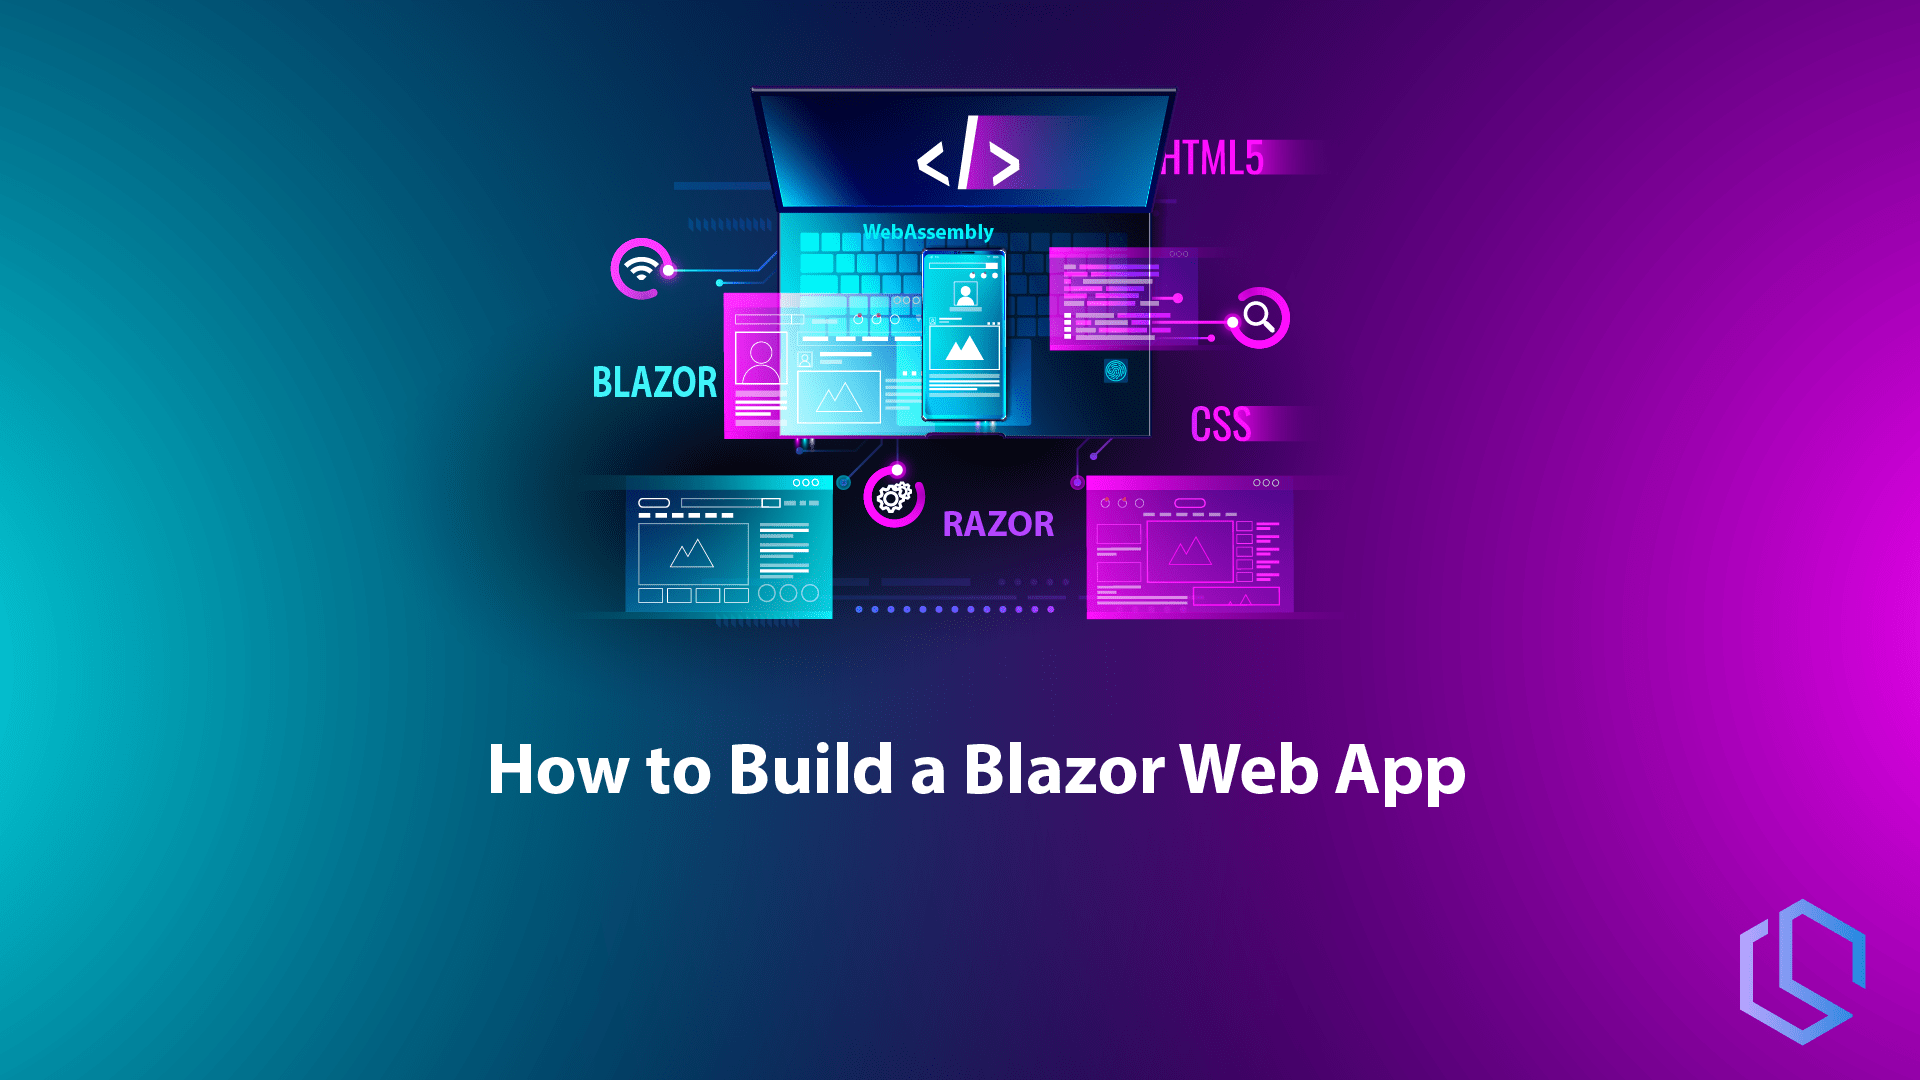 How To Build a Blazor Web App + In-depth theory about WASM and Razor (.NET 5)